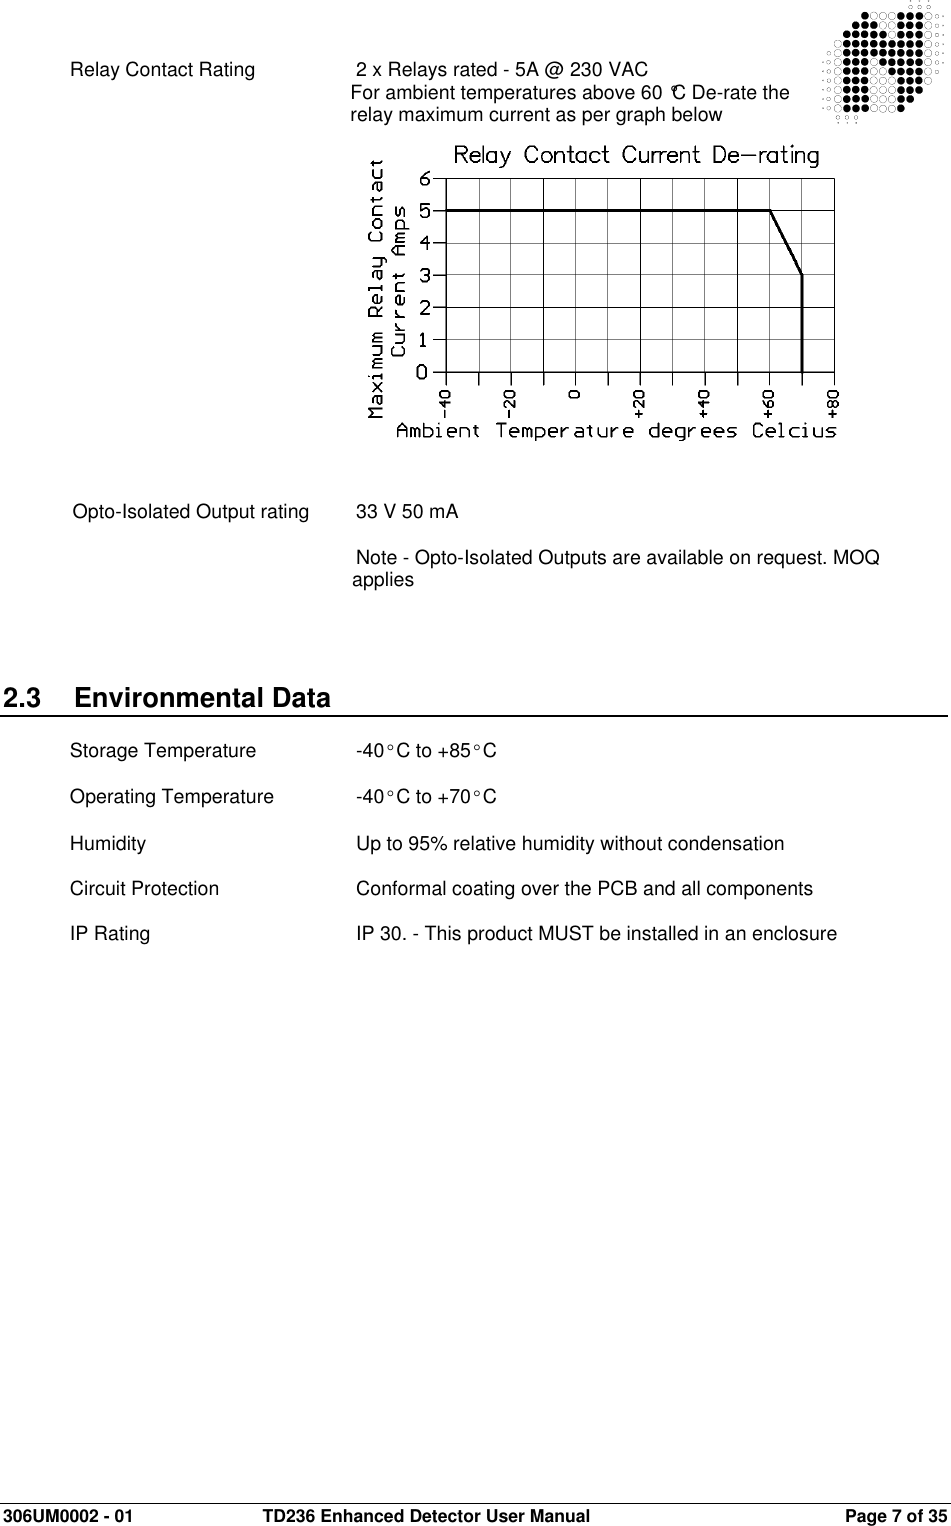  306UM0002 - 01  TD236 Enhanced Detector User Manual   Page 7 of 35  Relay Contact Rating    2 x Relays rated - 5A @ 230 VAC For ambient temperatures above 60 °C De-rate the relay maximum current as per graph below                  Opto-Isolated Output rating  33 V 50 mA  Note - Opto-Isolated Outputs are available on request. MOQ applies     2.3  Environmental Data  Storage Temperature    -40°C to +85°C  Operating Temperature    -40°C to +70°C  Humidity       Up to 95% relative humidity without condensation  Circuit Protection    Conformal coating over the PCB and all components  IP Rating      IP 30. - This product MUST be installed in an enclosure   